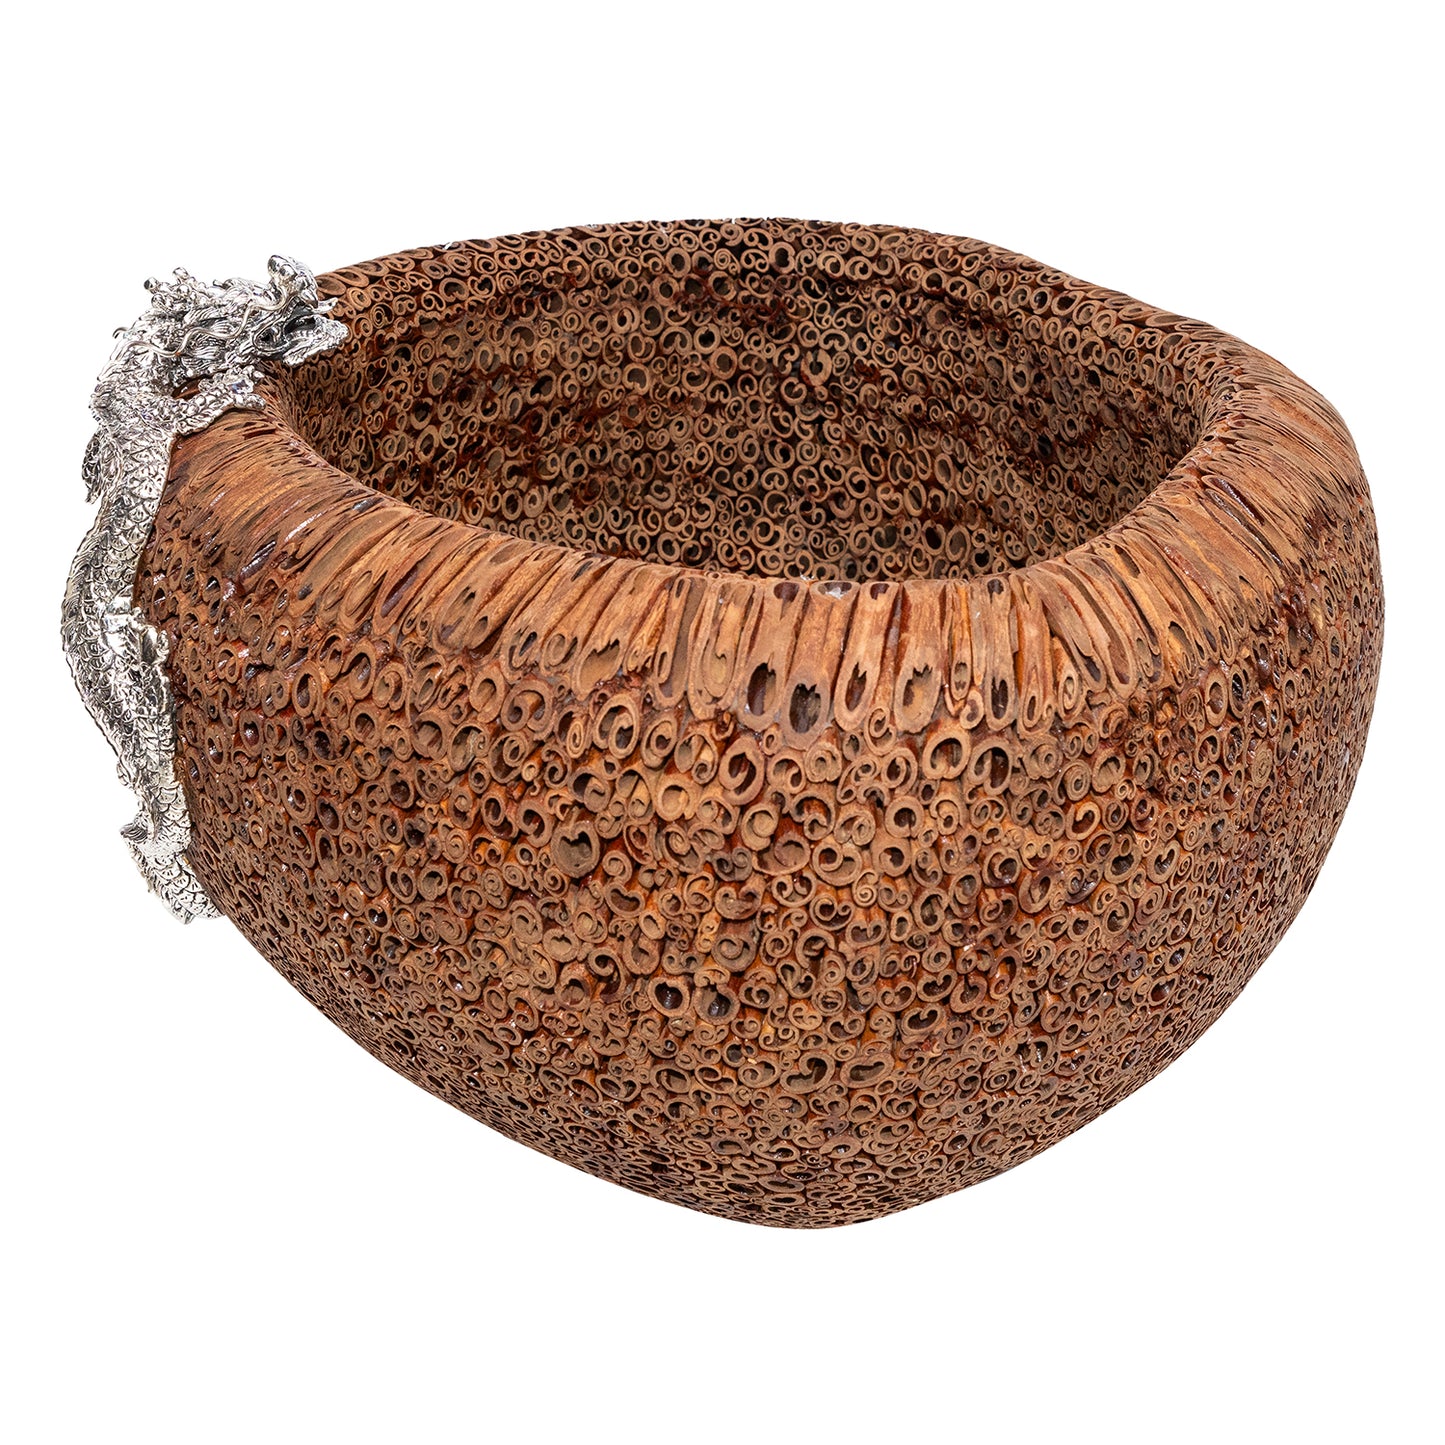 Cinnamon Bowl with Swirling Silver Dragon #S